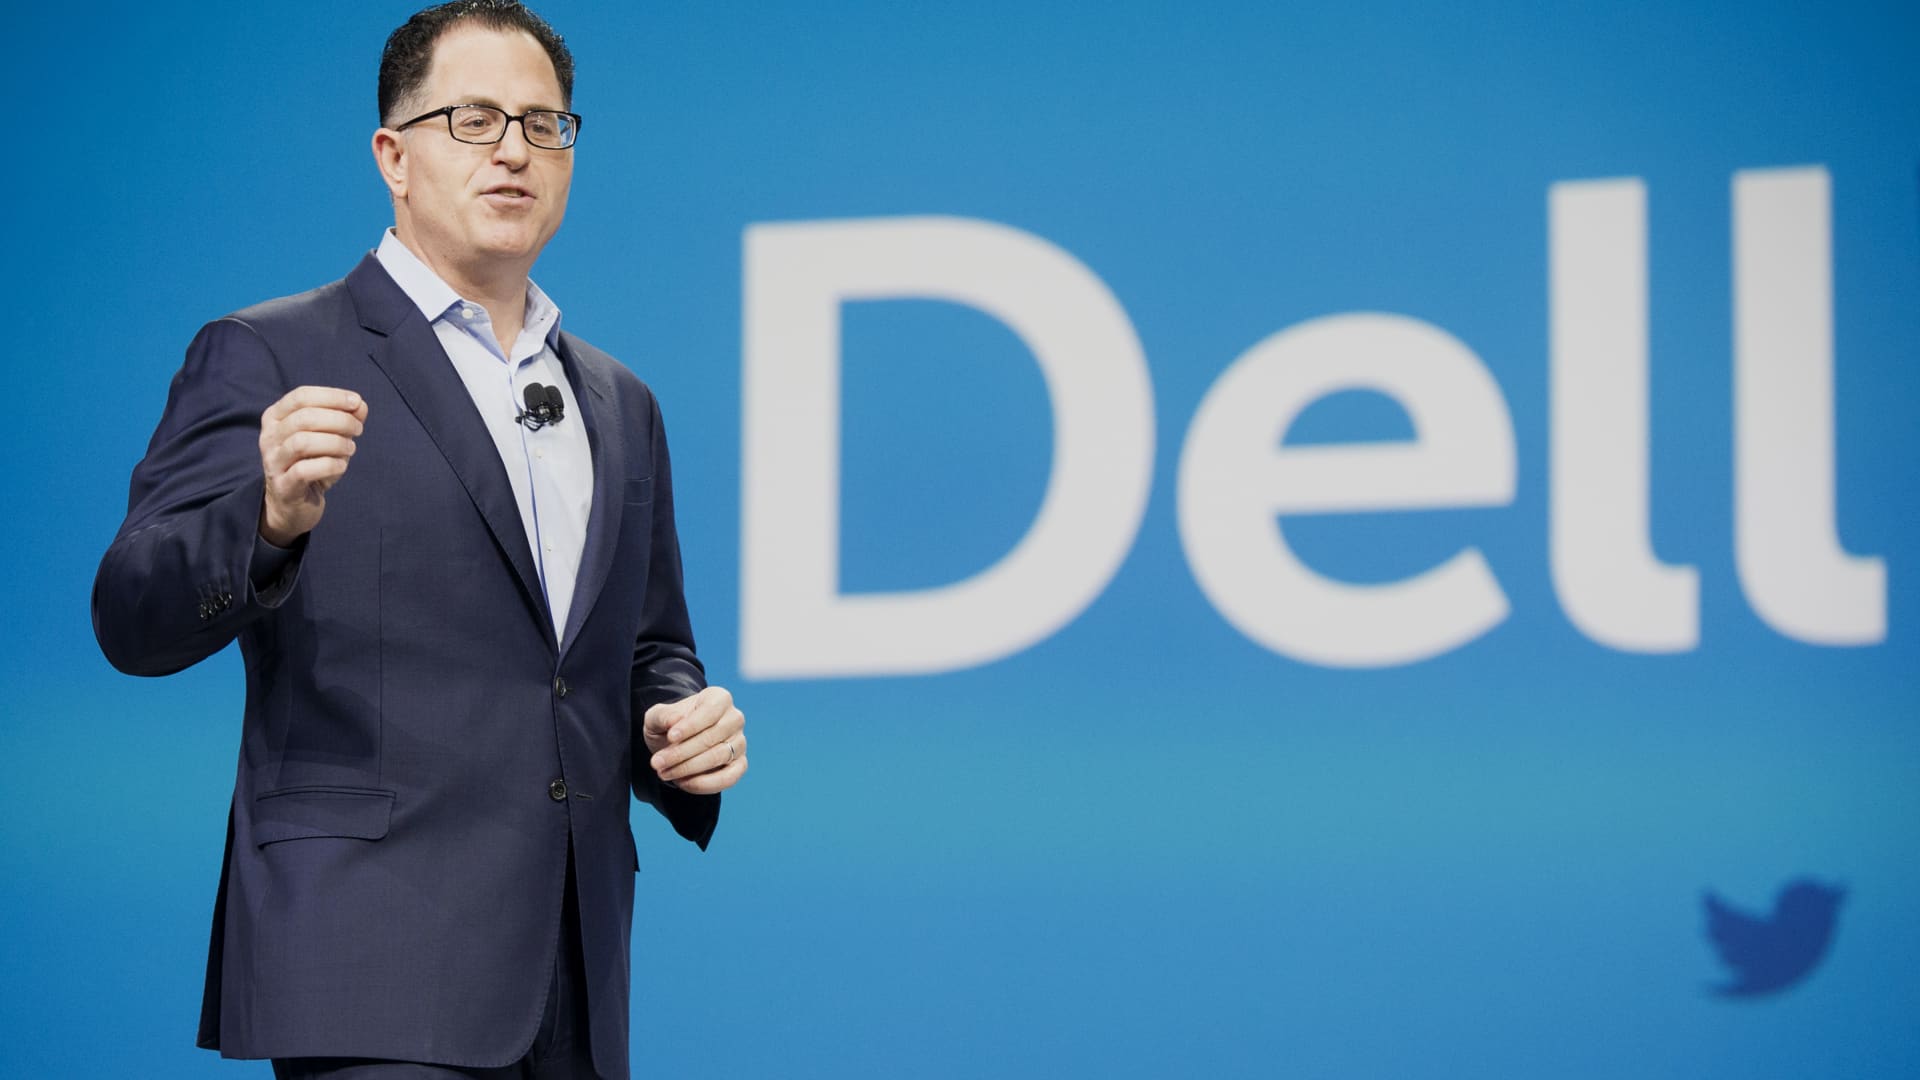 Dell shares soar 15% after beating earnings expectations, cites rising demand for AI servers